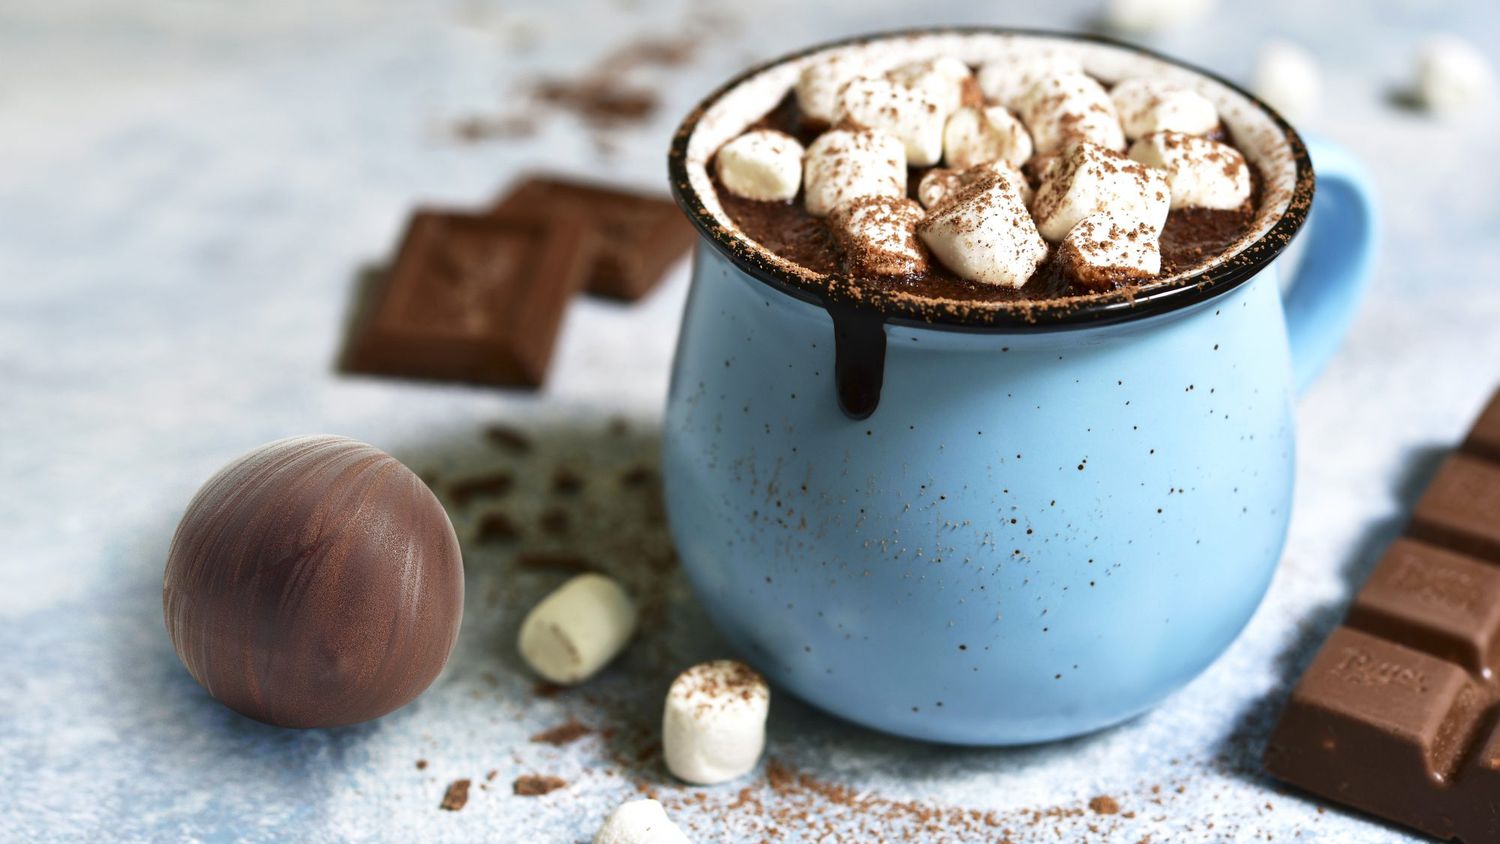 How to Make Homemade Hot Chocolate Bombs for the Most Decadent Drink Ever